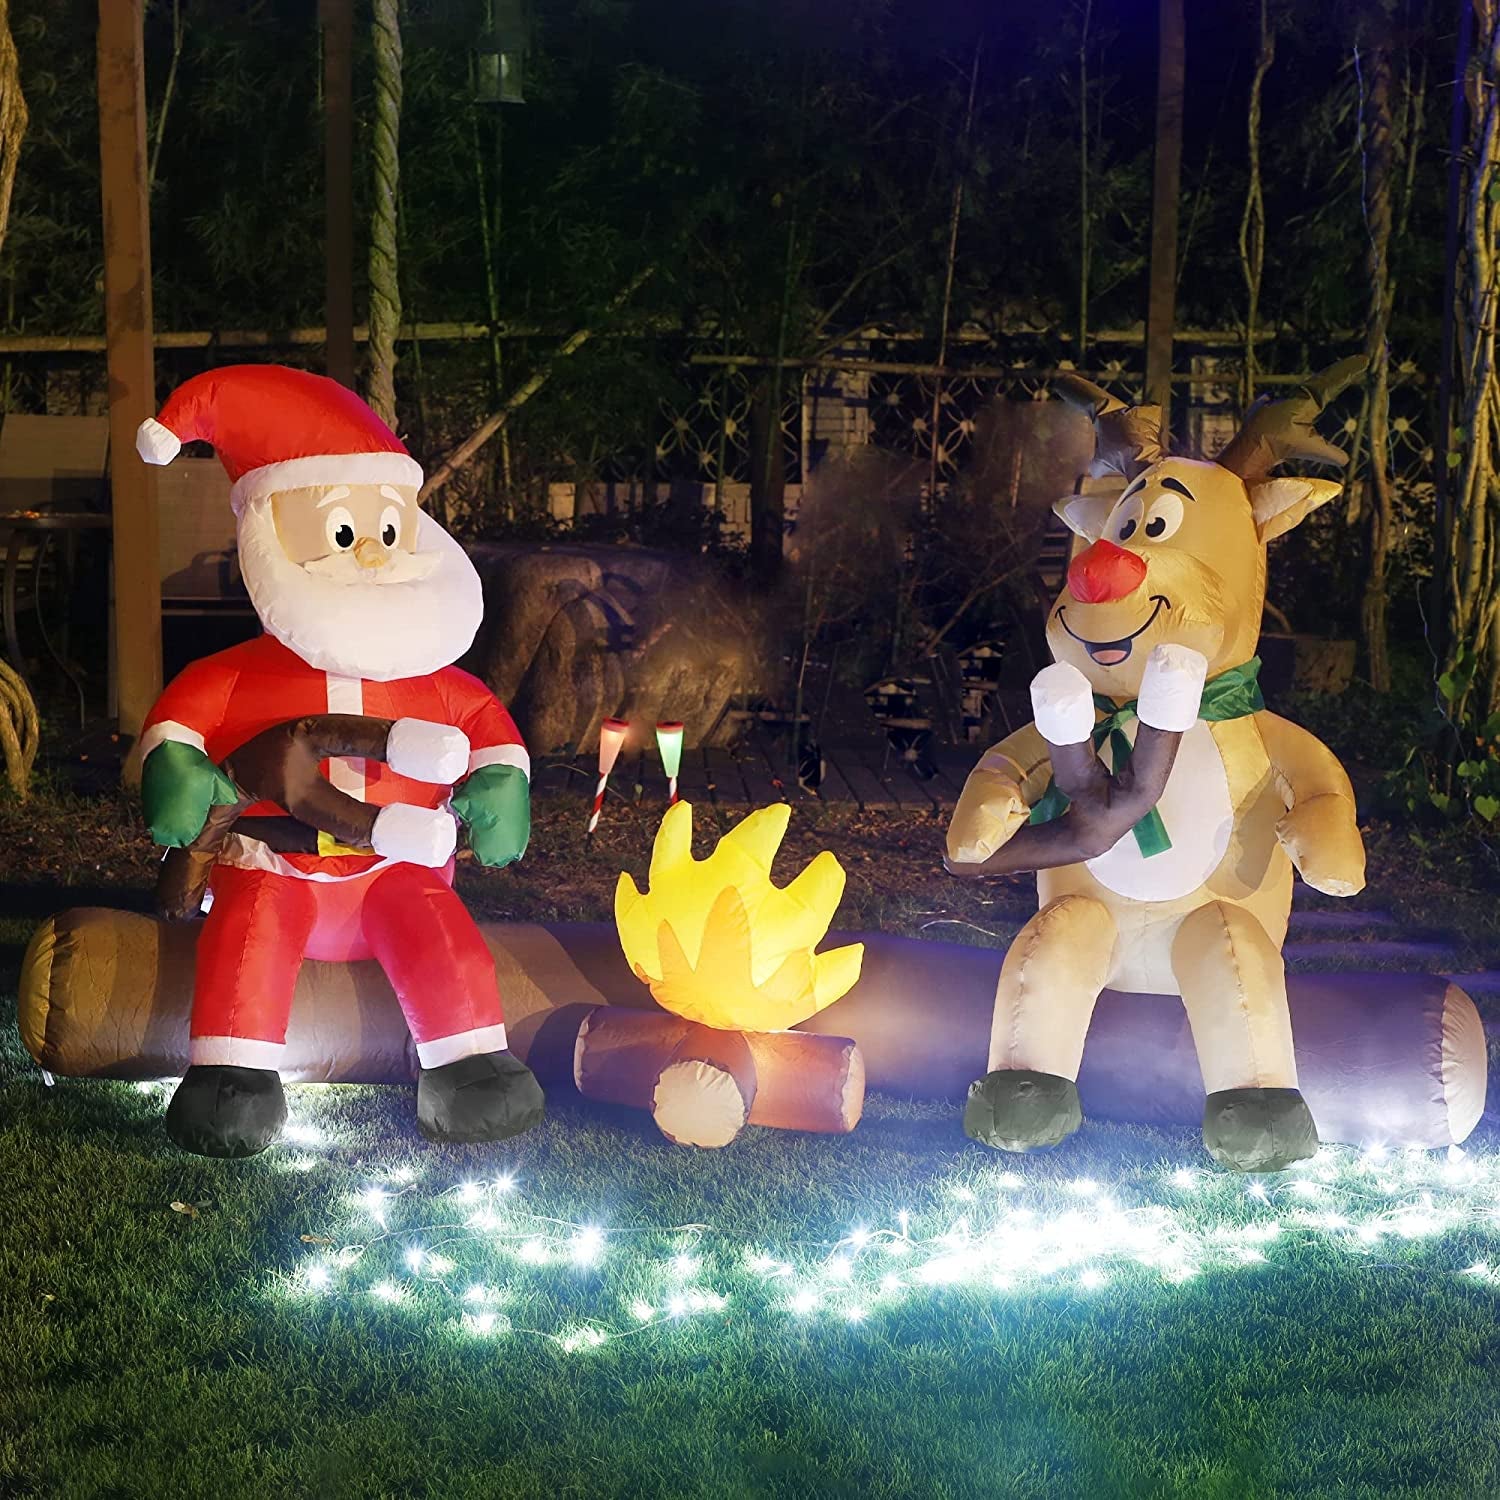 Christmas Inflatable Decorations, Light up Xmas Blowups for Winter Yard Lawn Garden Indoor Outdoor Decor (Santa and Reindeer Roasting Marshmallows over Campfire)